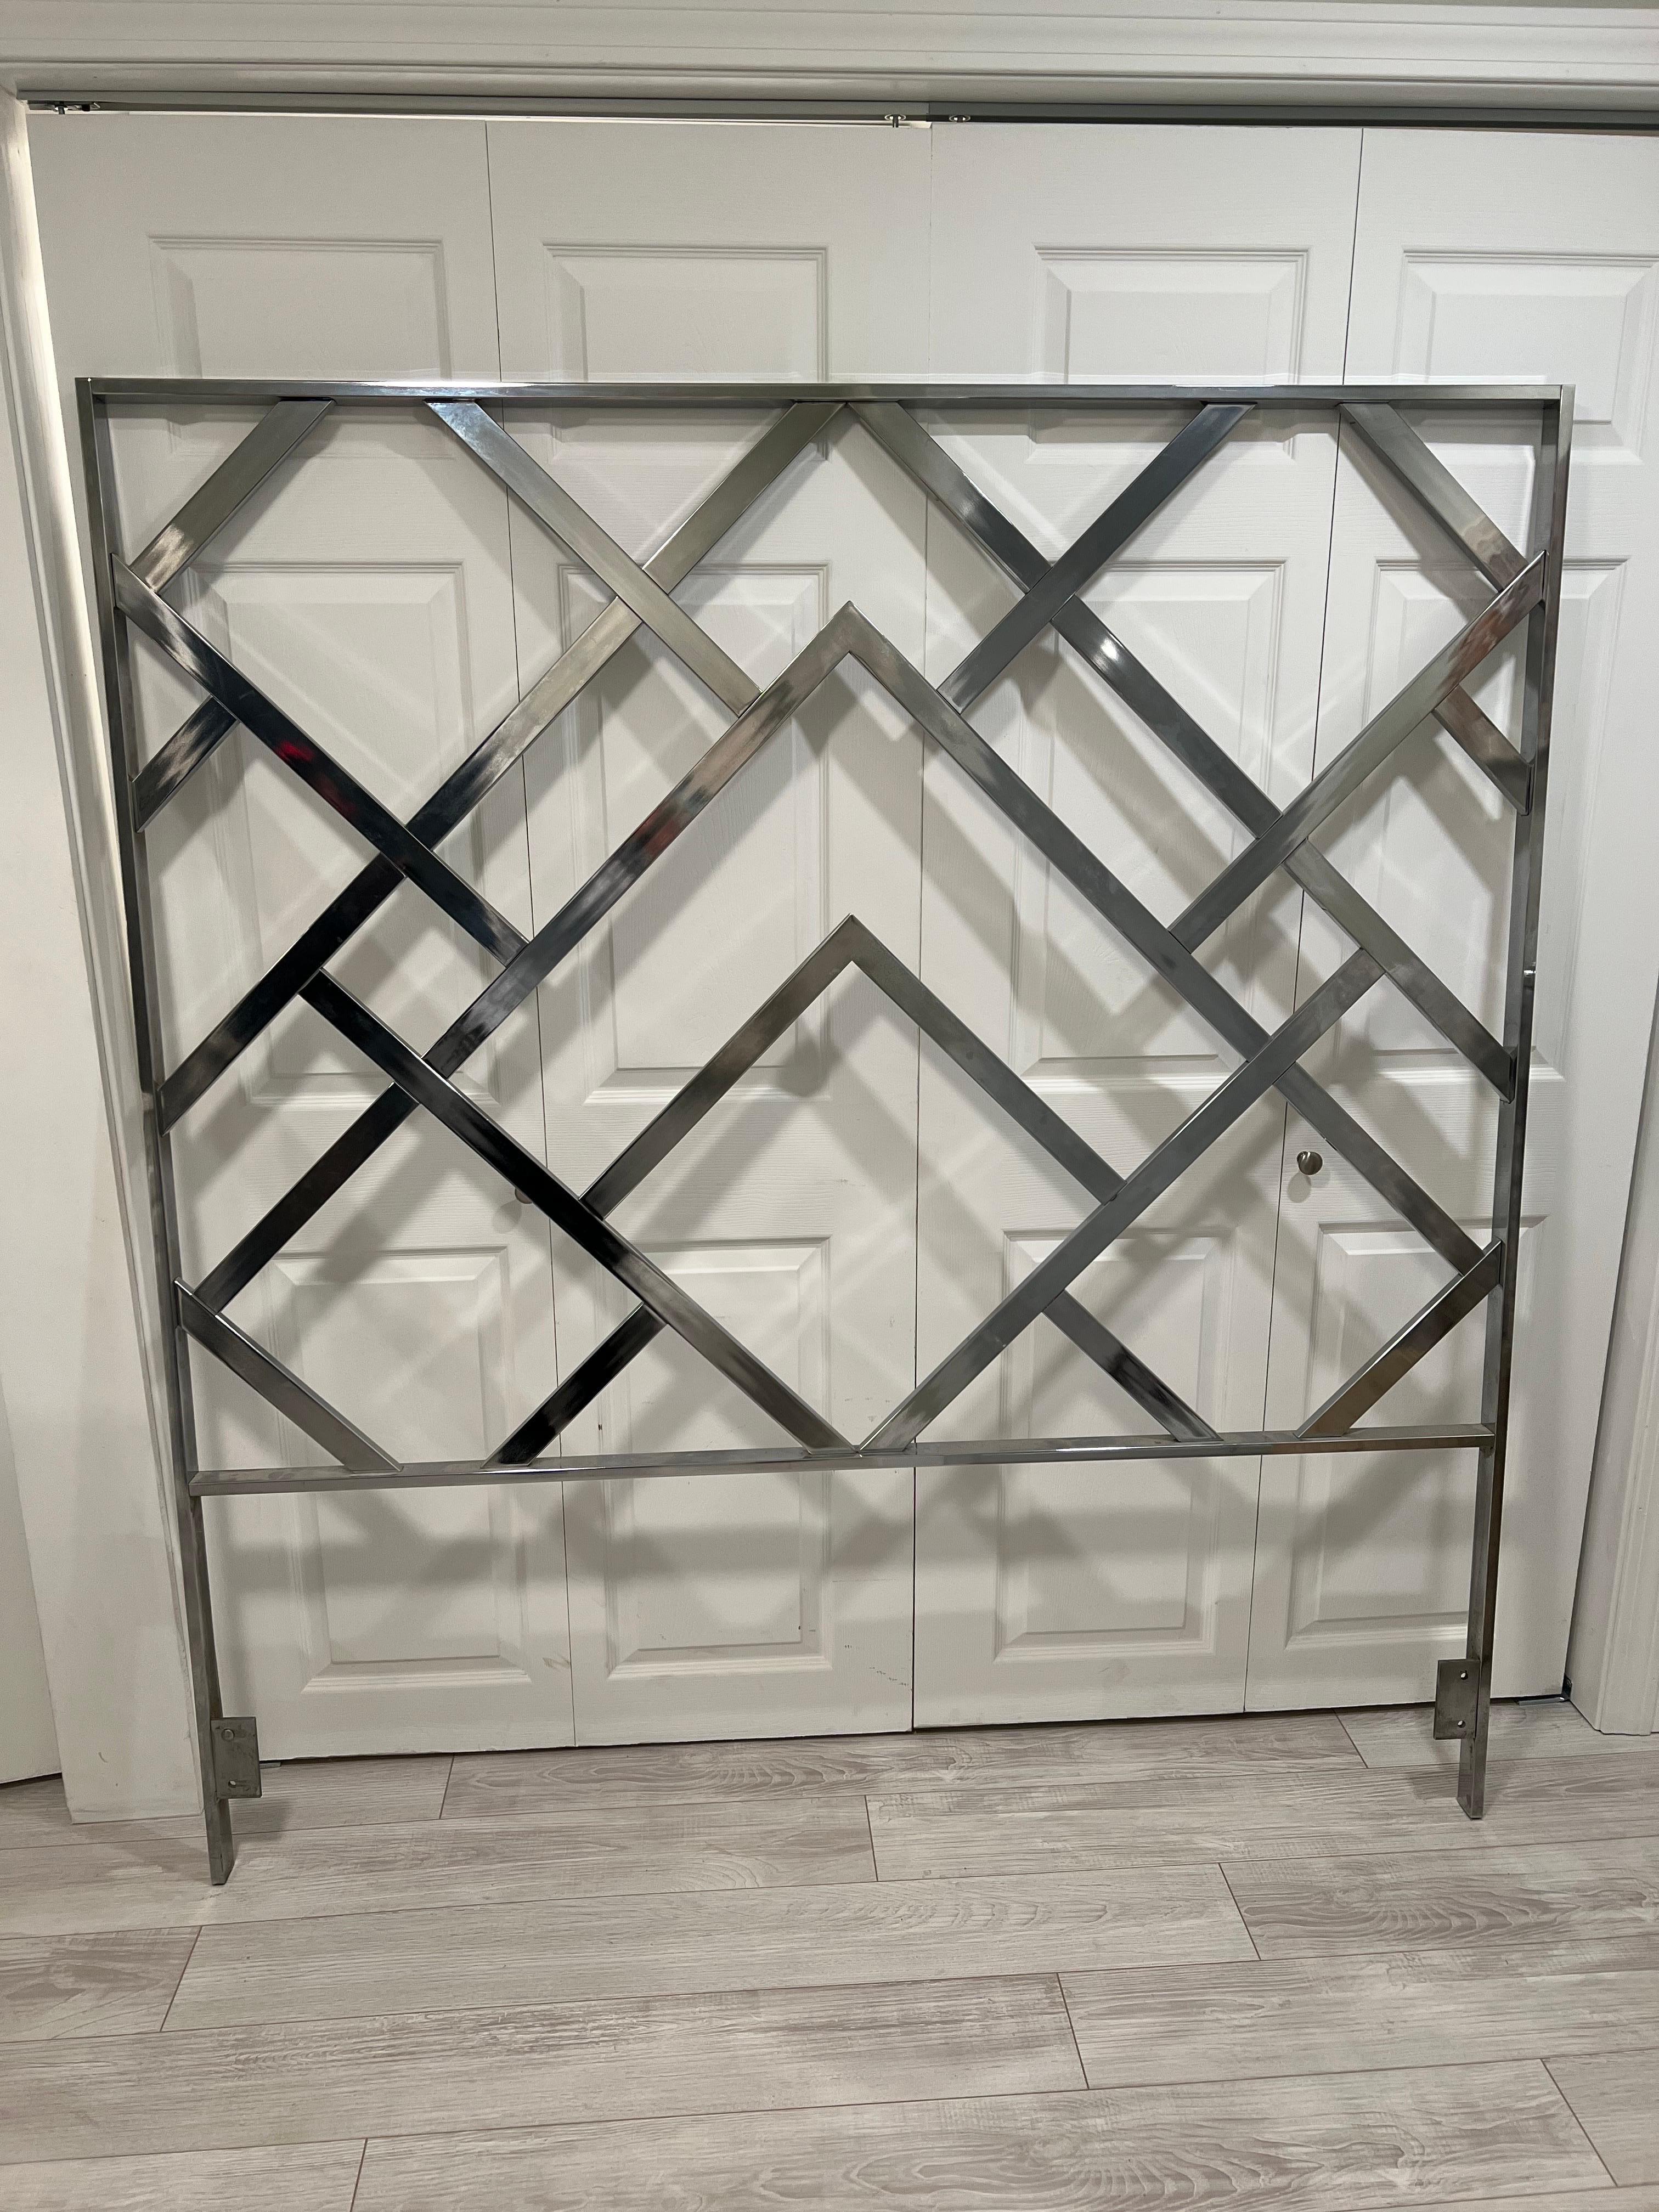 Mid Century Modern Milo Baughman Chrome Chinoiserie Headboard. Classic 1970's chevron lattice most likely produced by the Design Institute of America. Polished mirrored chrome will add some Hollywood glam to your room. Think Studio 54 meets Pierre